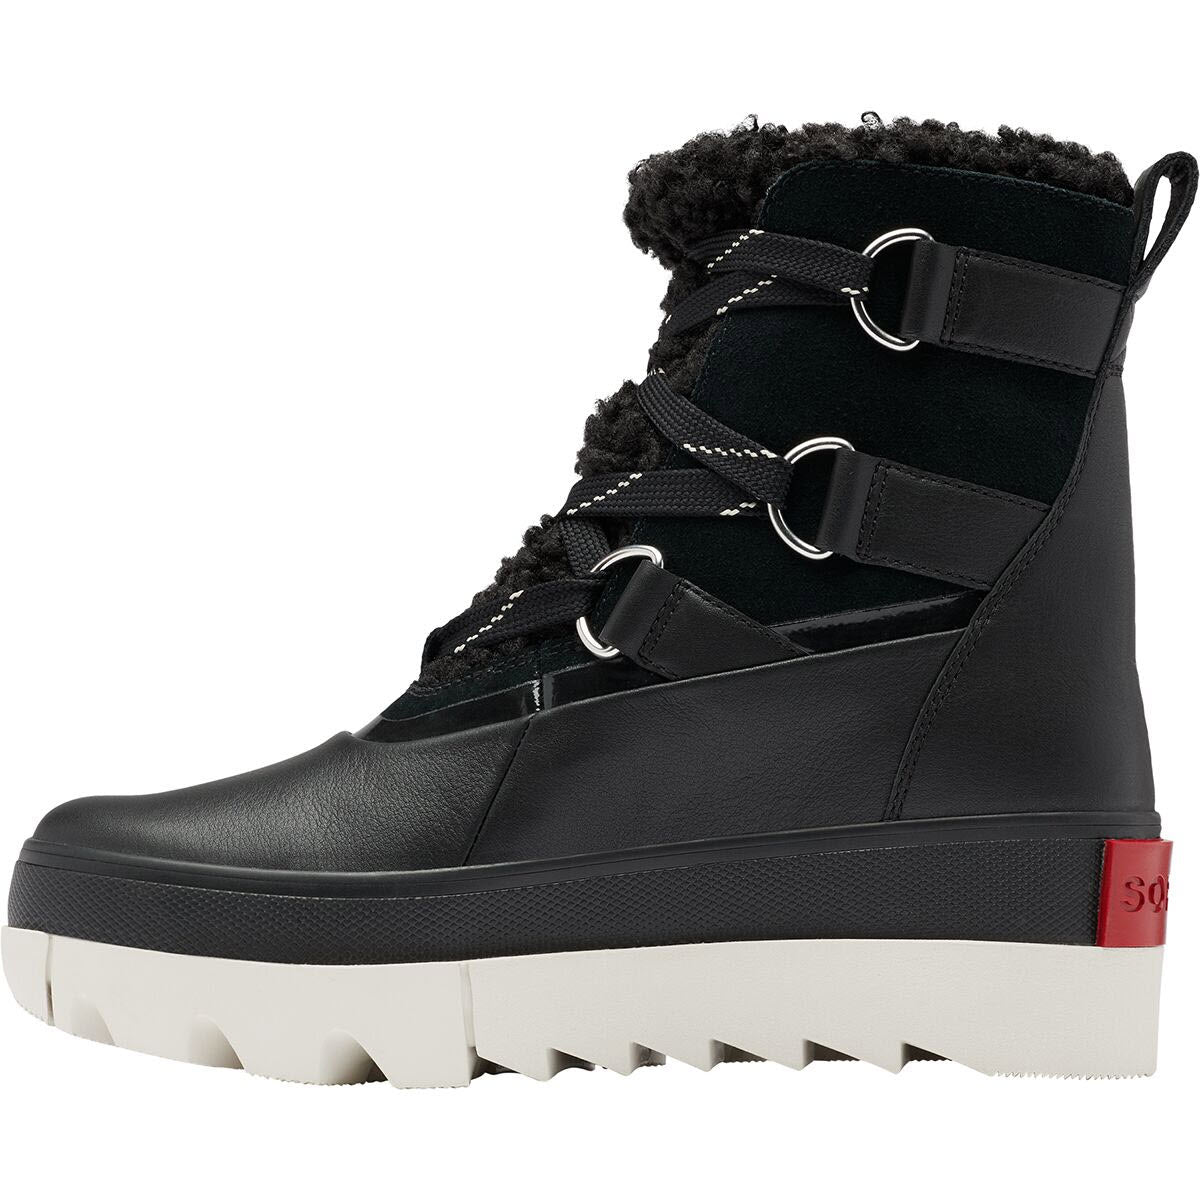 SOREL JOAN OF ARCTIC NEXT BOOT BLACK - WOMENS with a white platform sole, black laces, and a textured upper section around the ankle. Featuring waterproof construction and a red brand detail on the back heel, its high-traction sole ensures stability in slippery conditions.